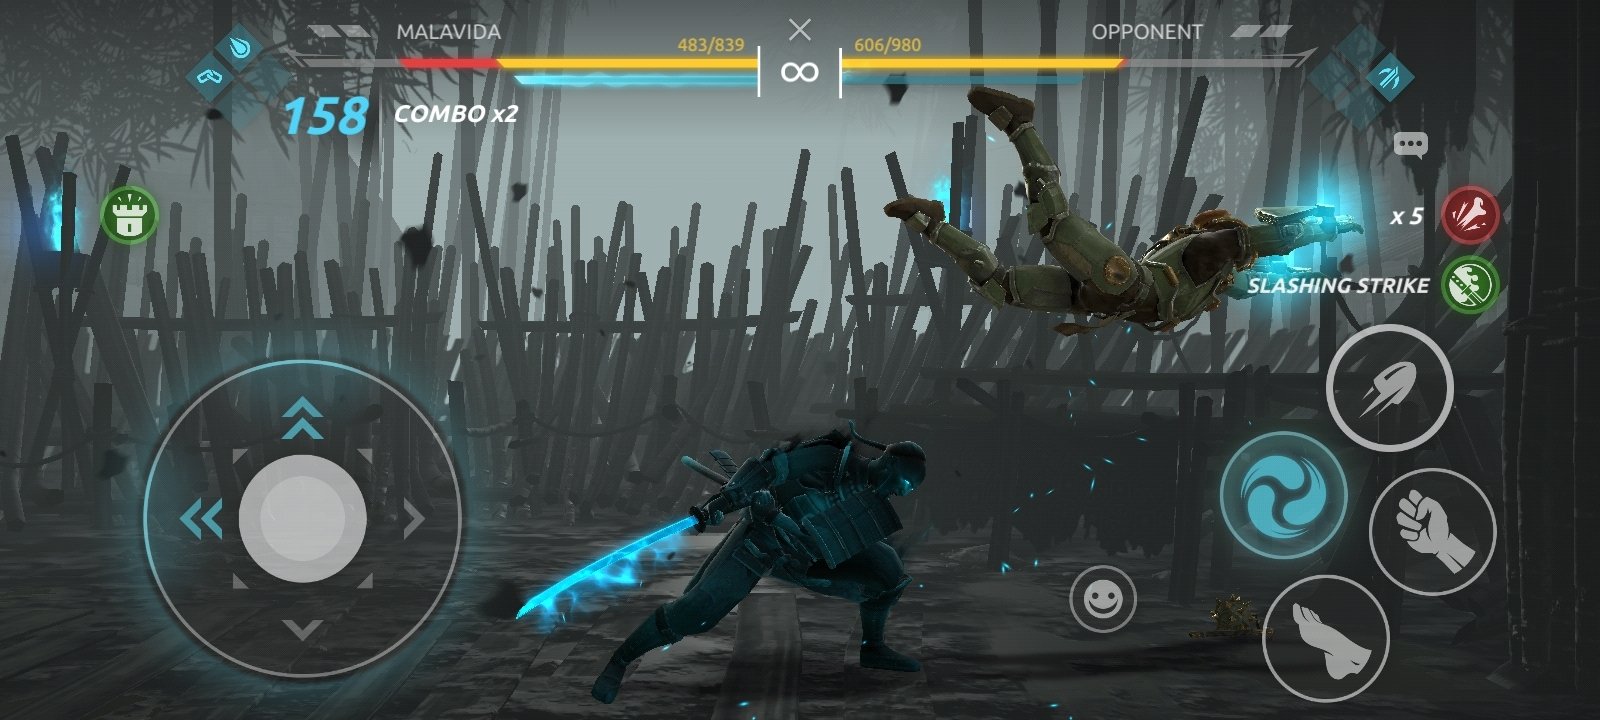 download free shadow fight arena obb file download